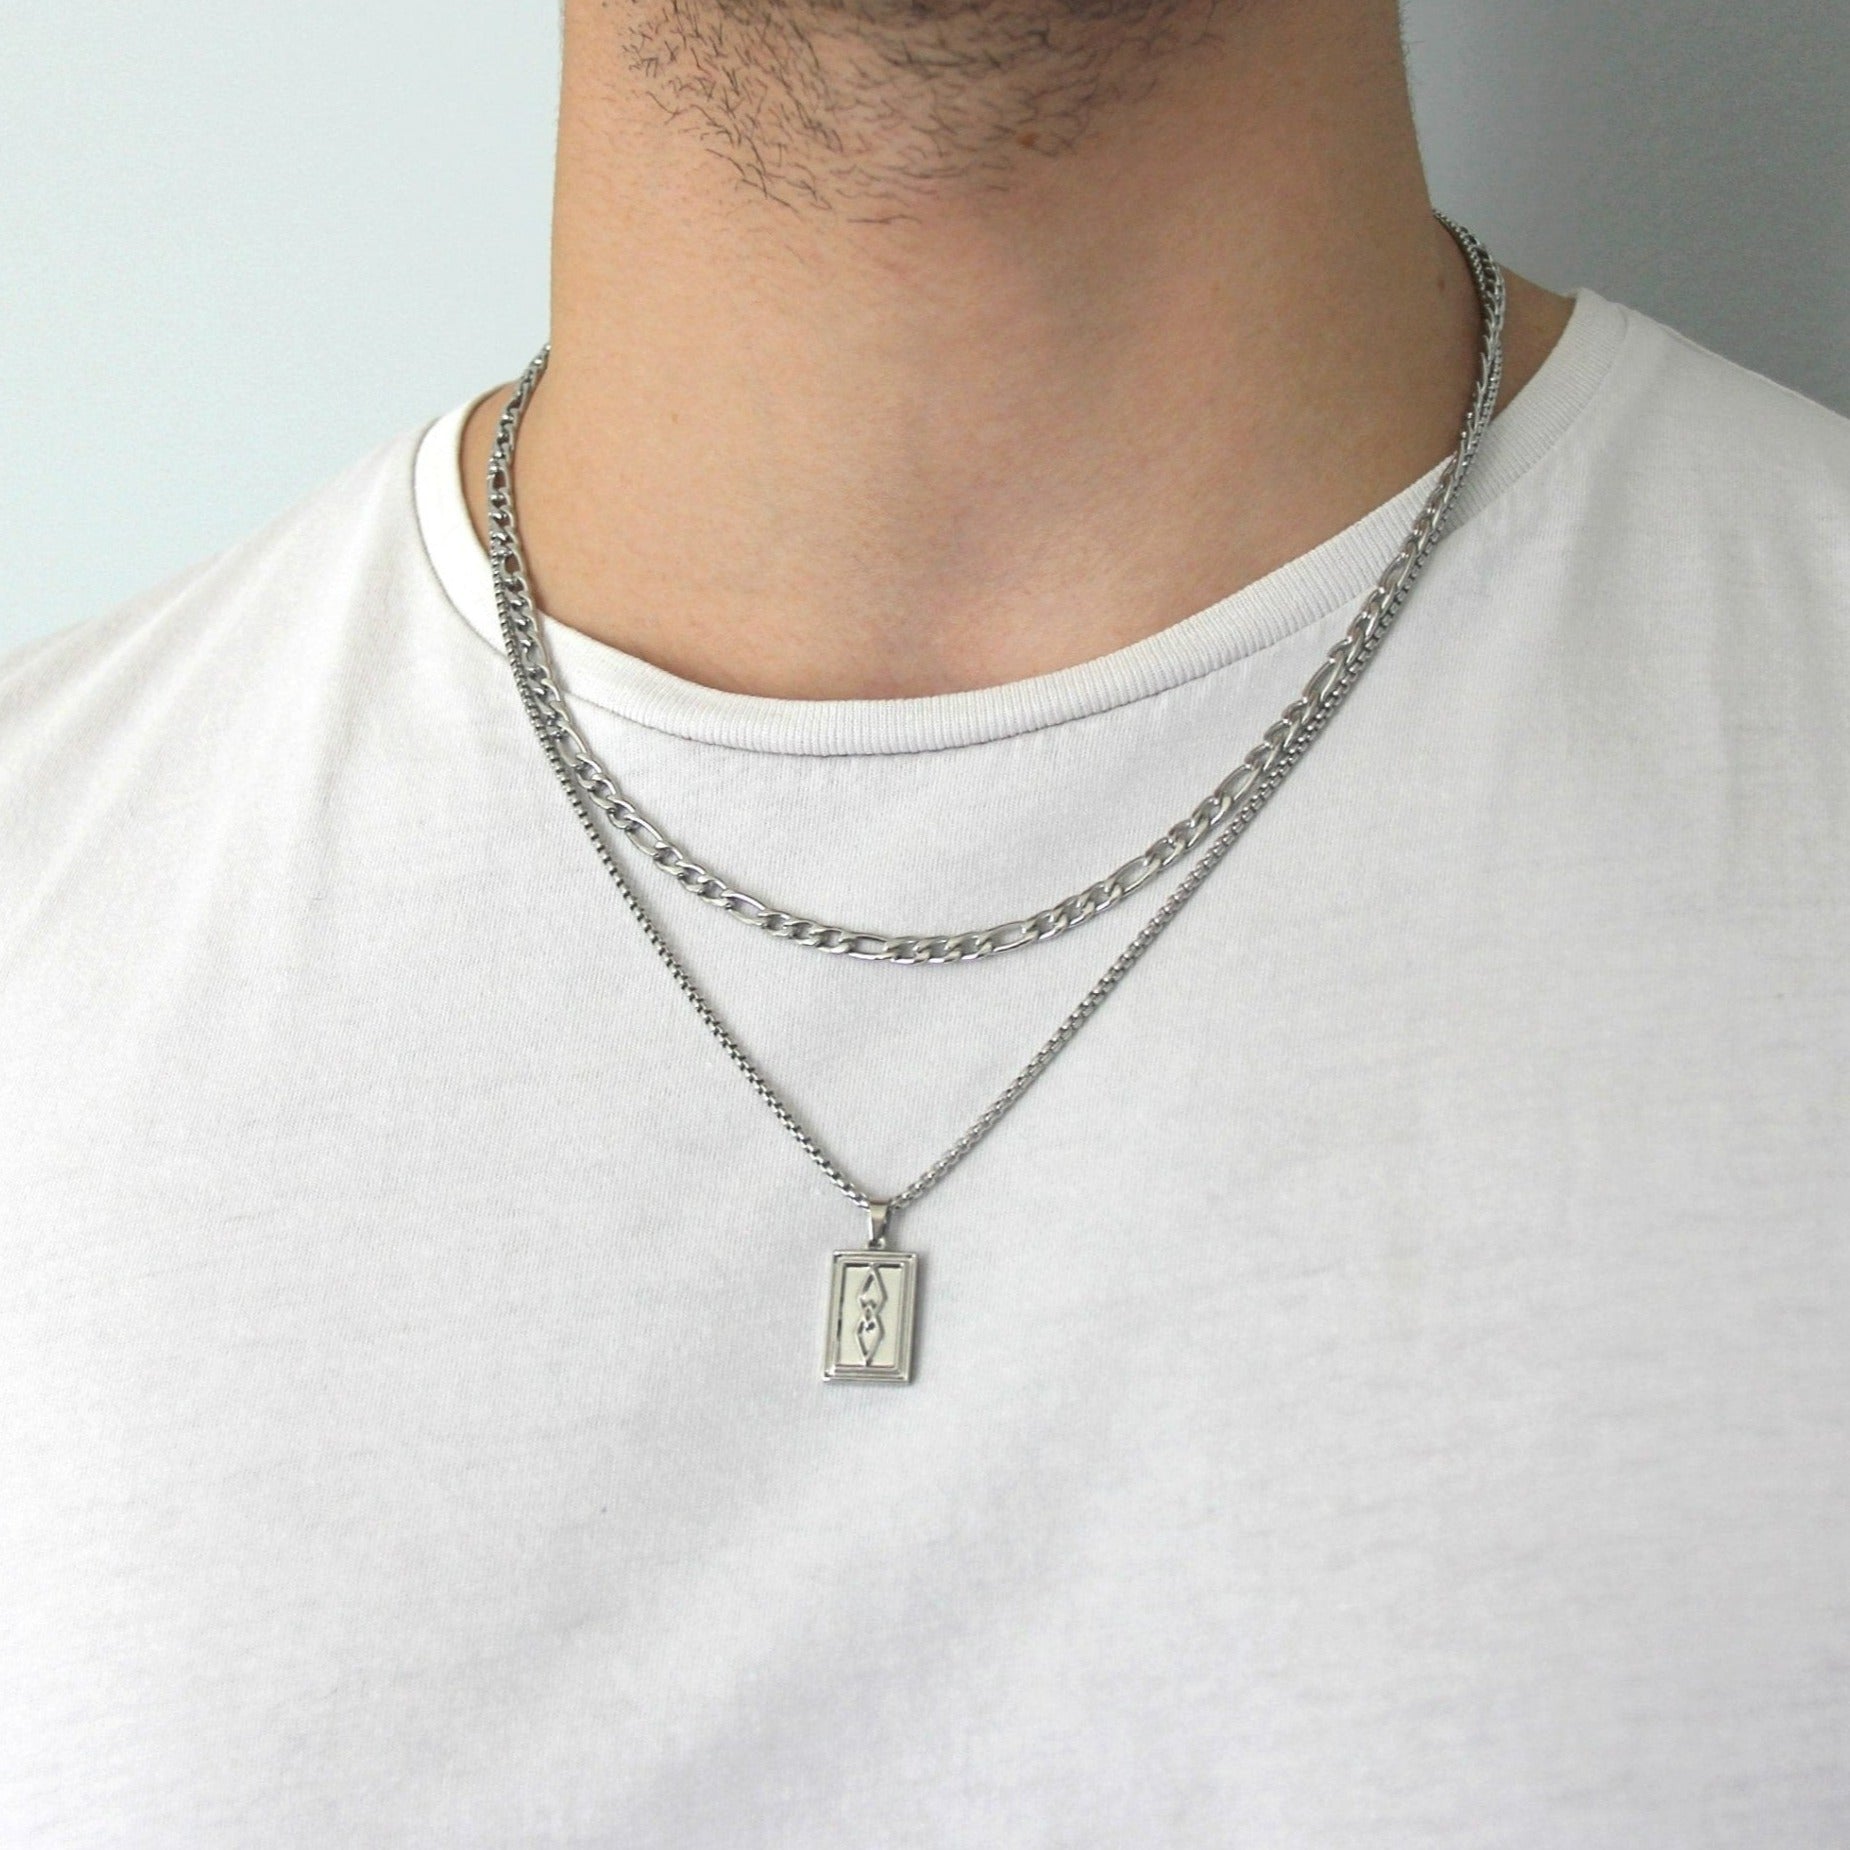 Lock Paperclip Chain Necklace | Rose gold chain necklace, Necklace, Chain